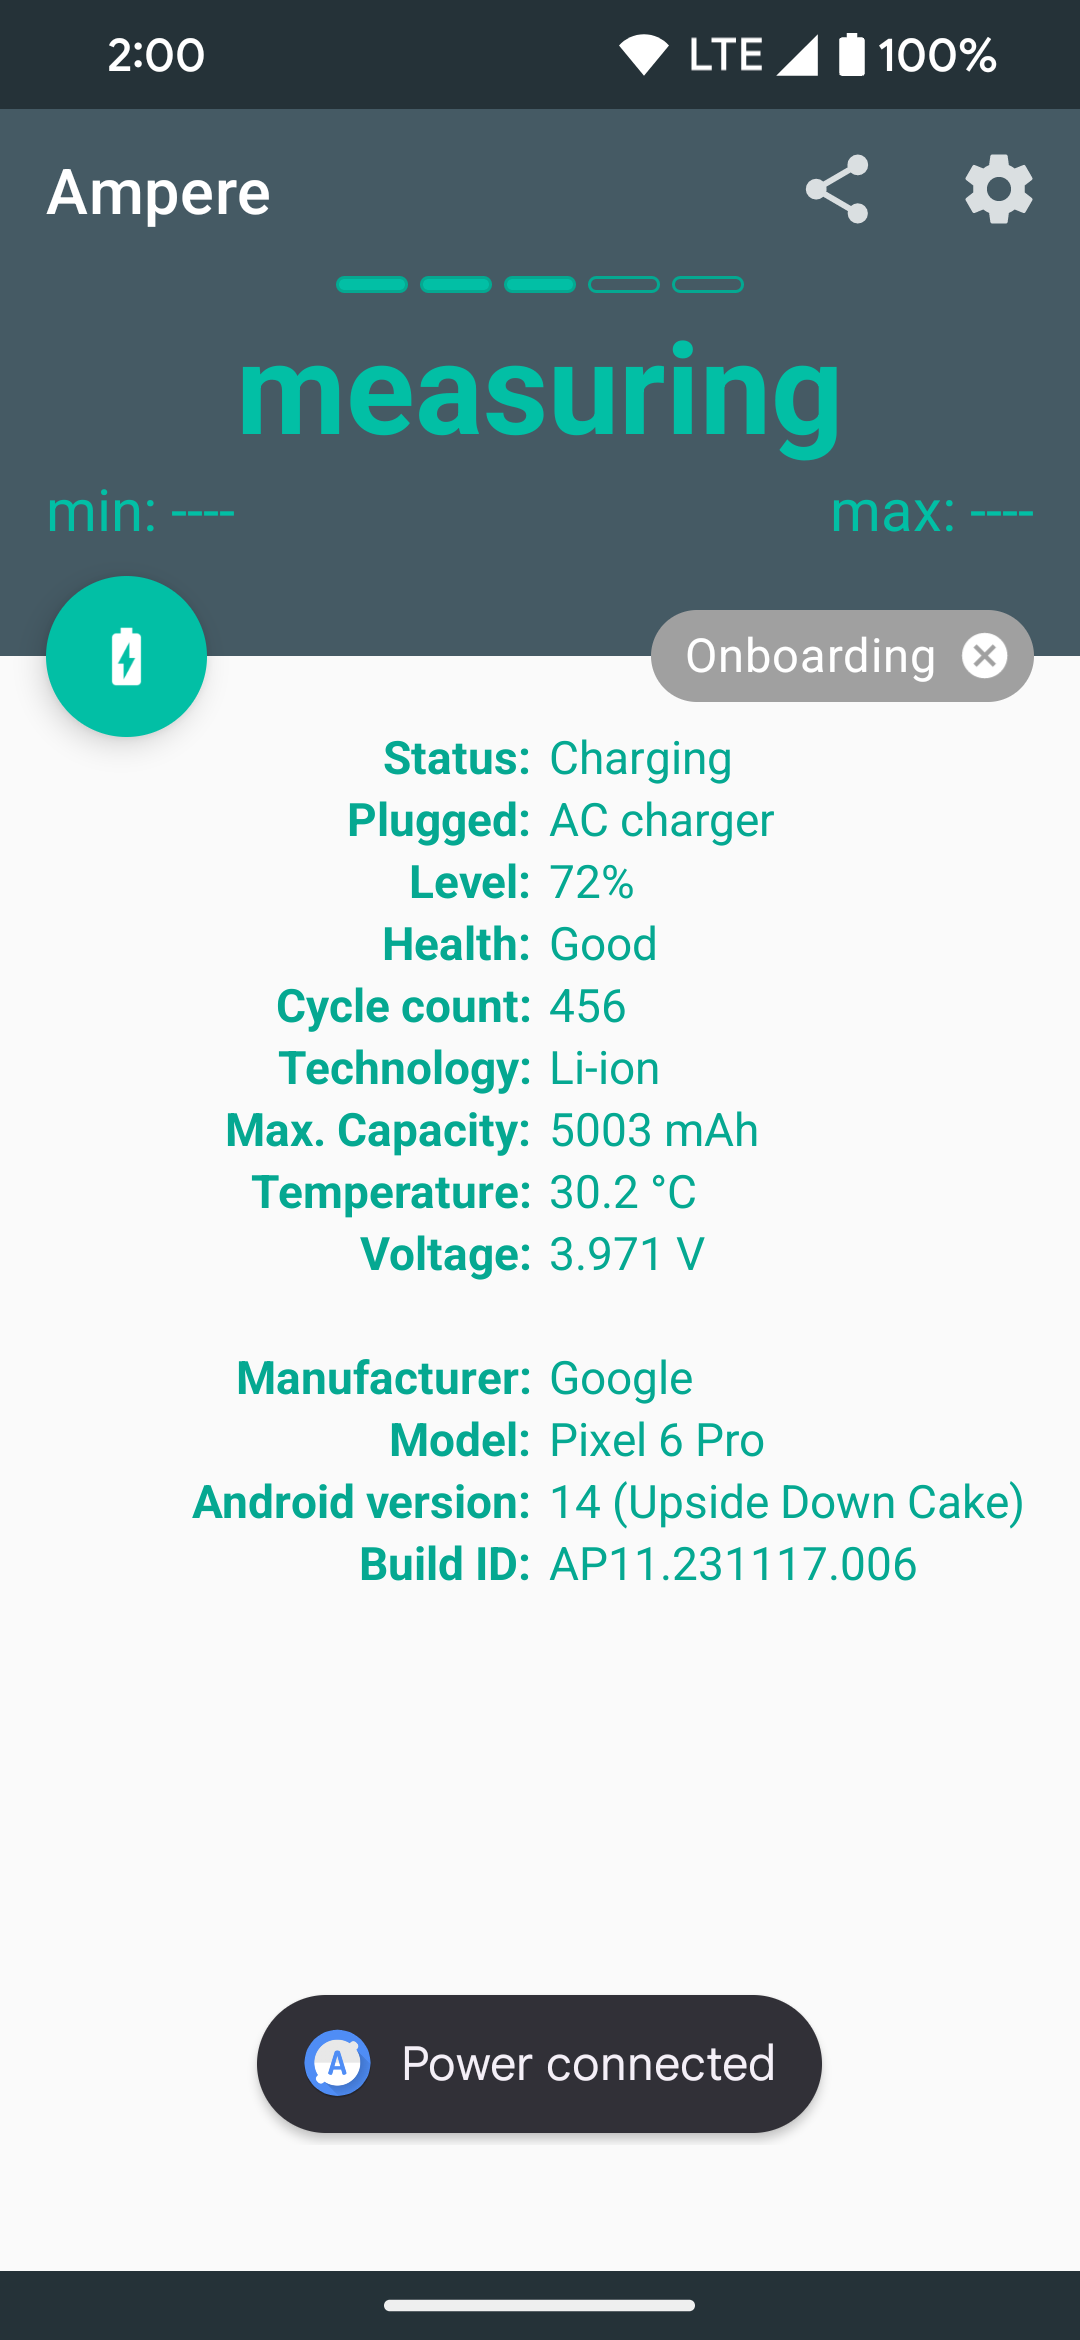 The Ampere app on Android in now measuring the charging speed